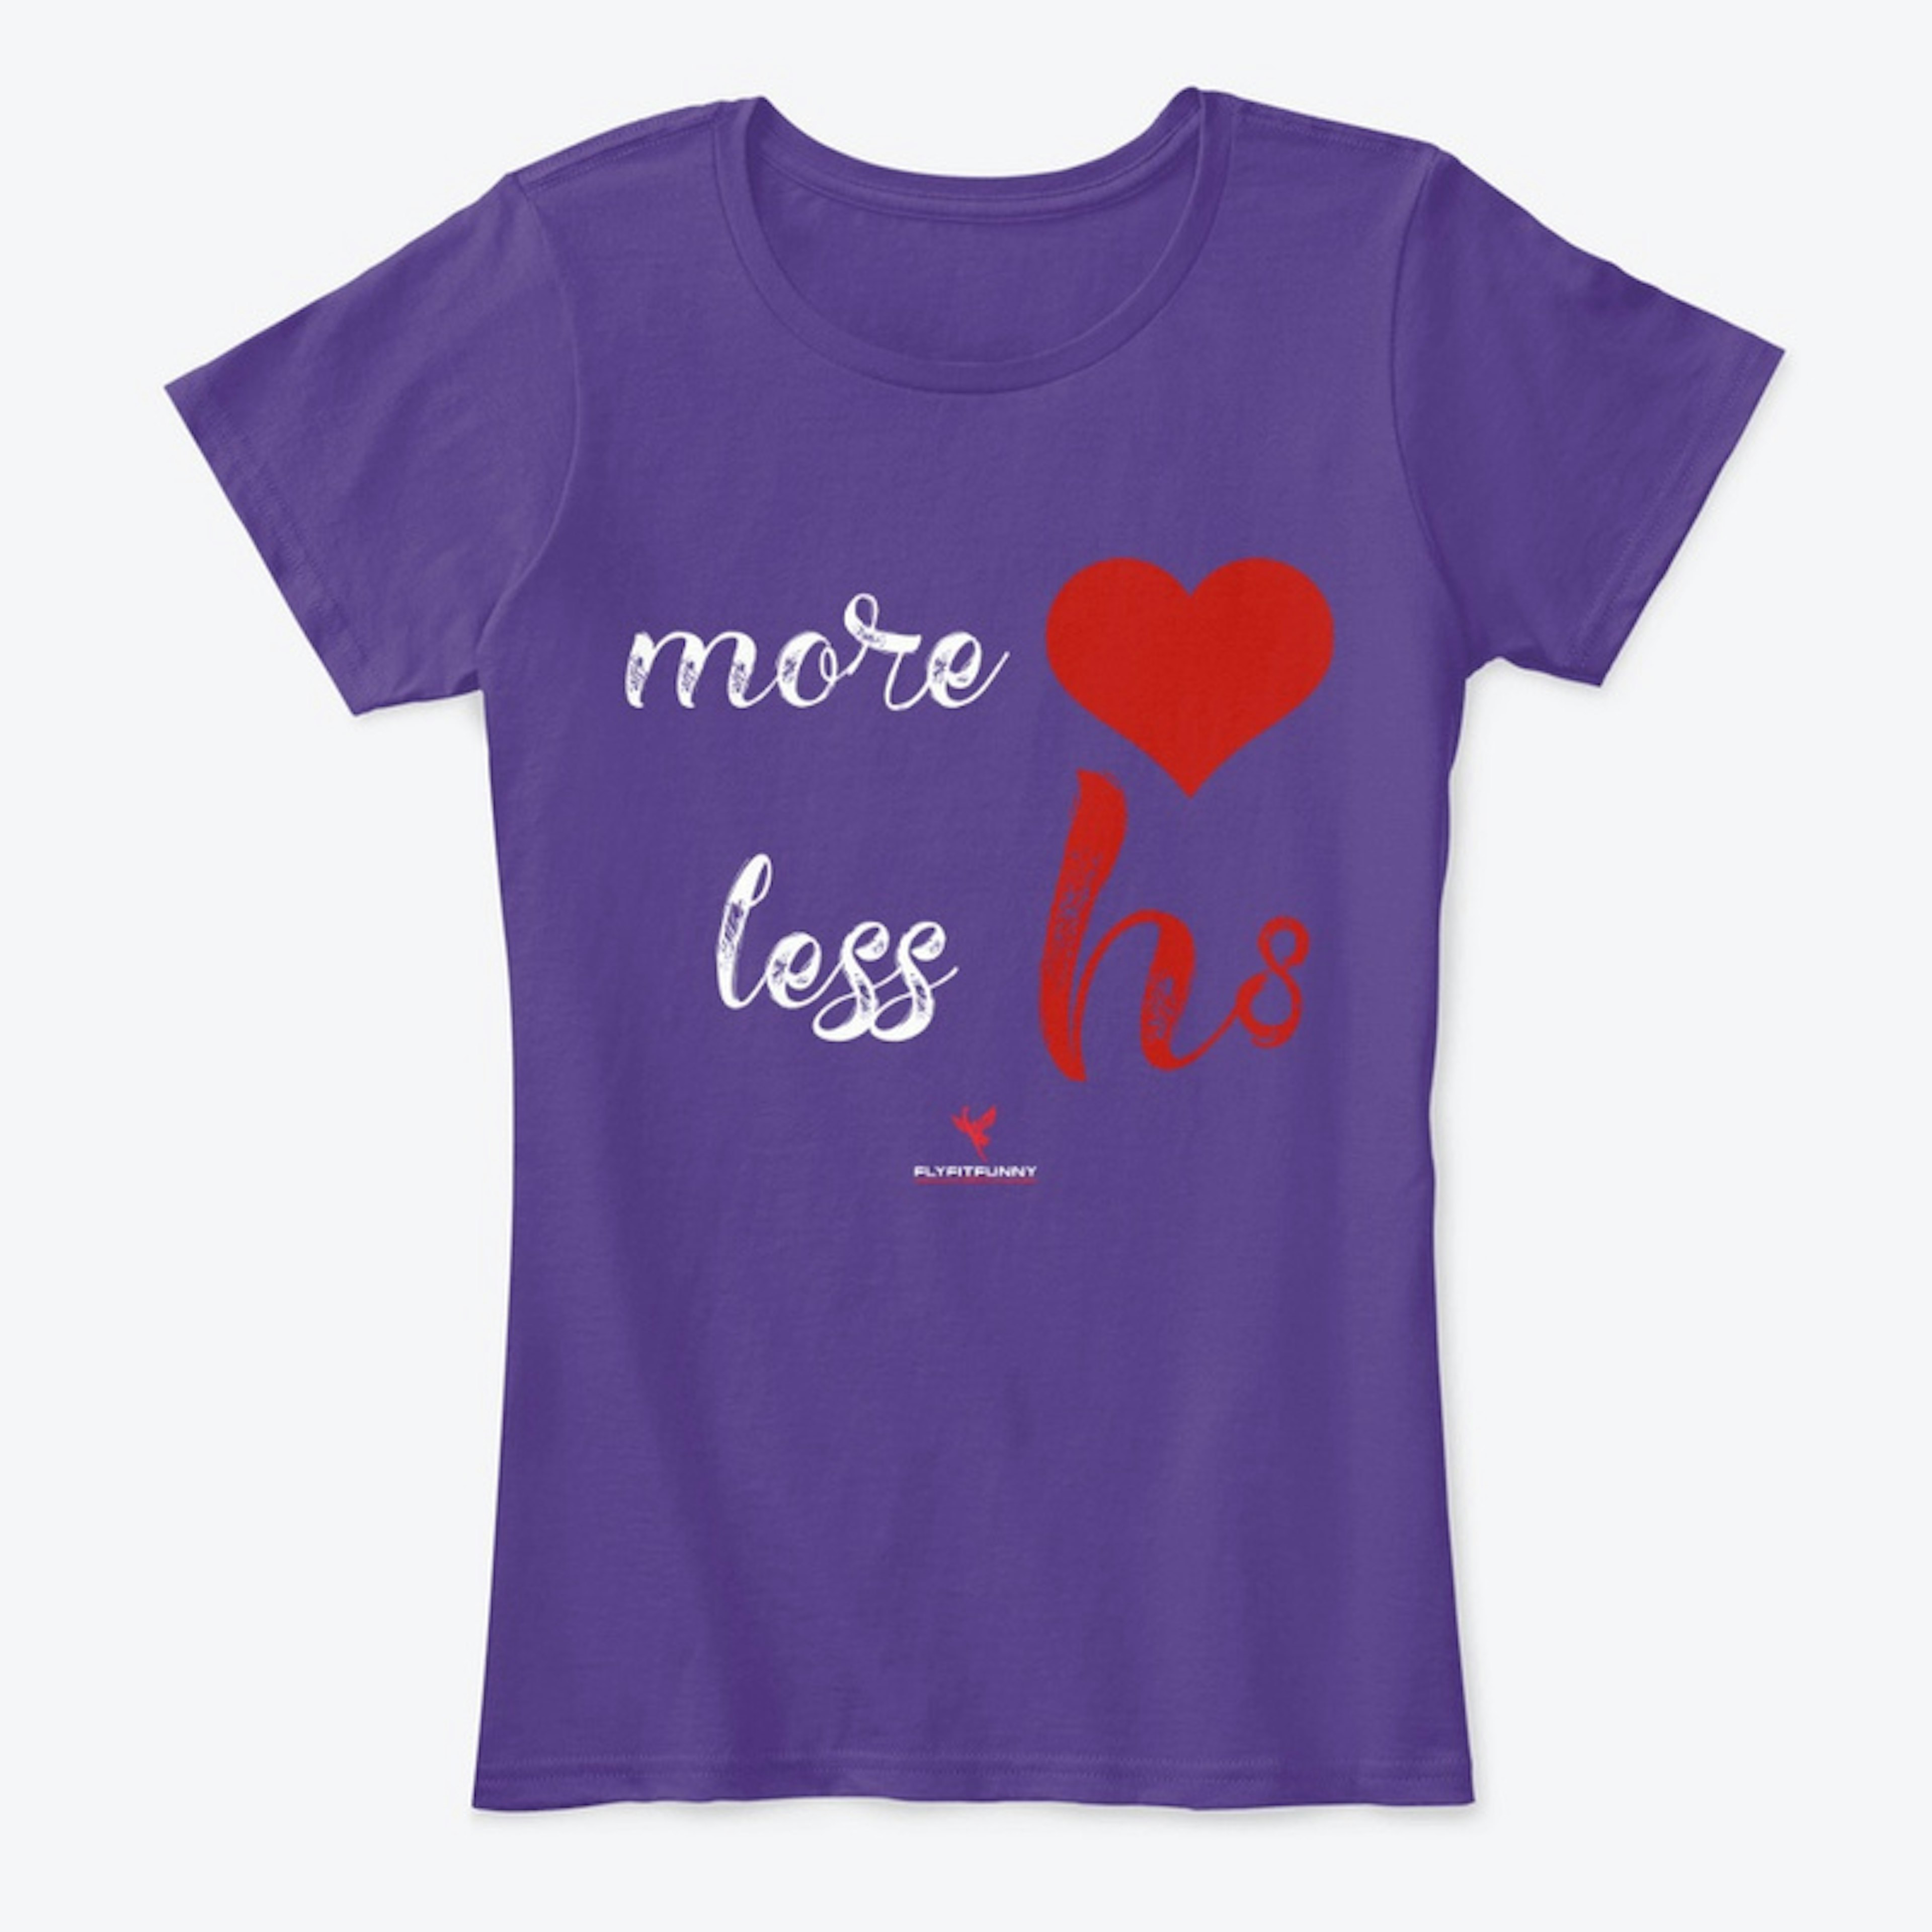 MORE LOVE LESS HATE: Exclusive